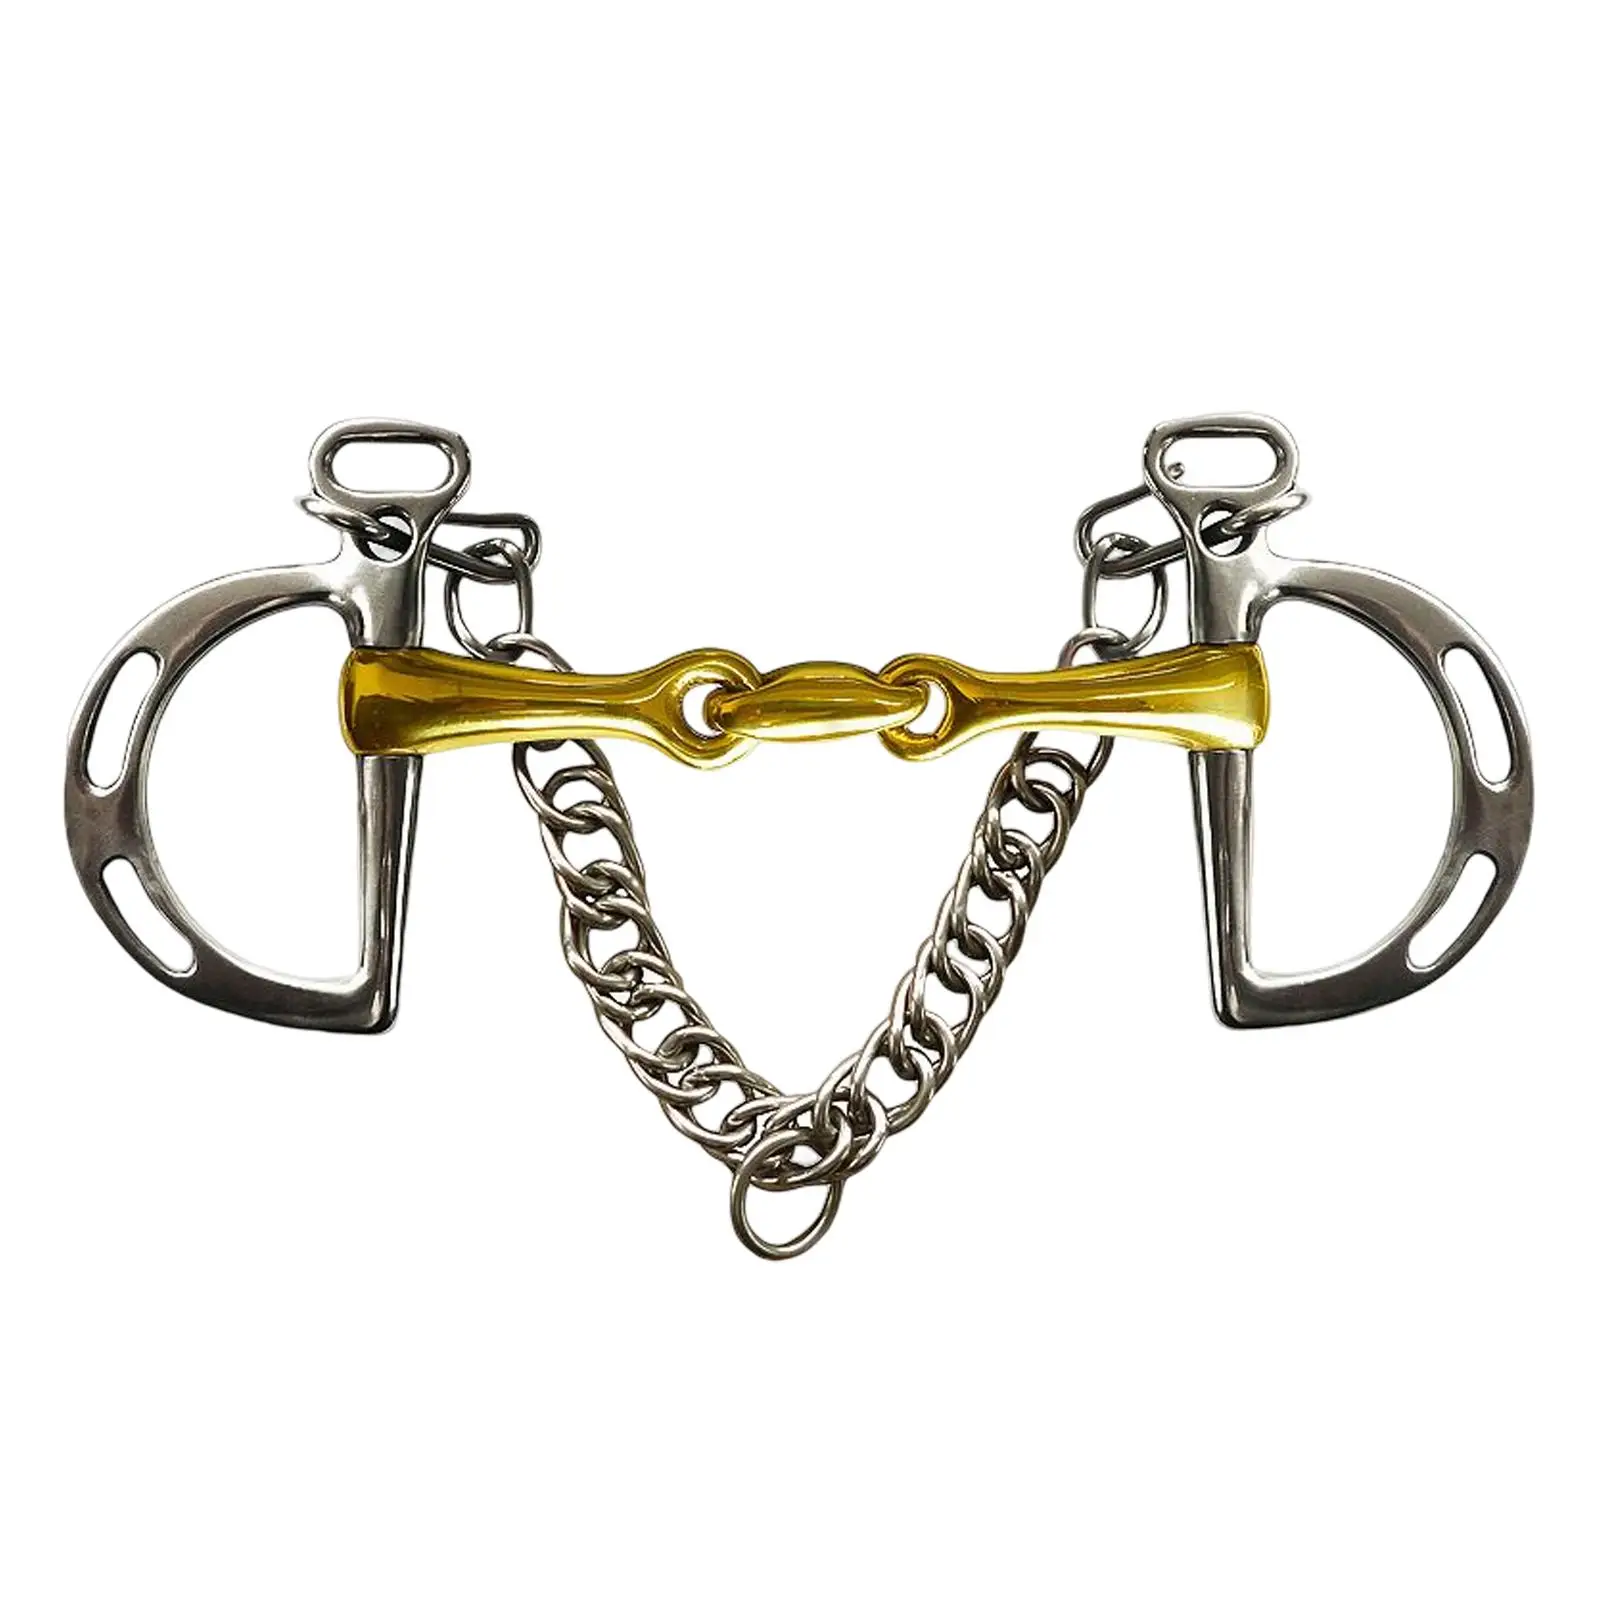 horse Bit Copper Mouth Center Roller with Silver Trims Cheek Harness for Horse Bridle Equestrian Training Equipment